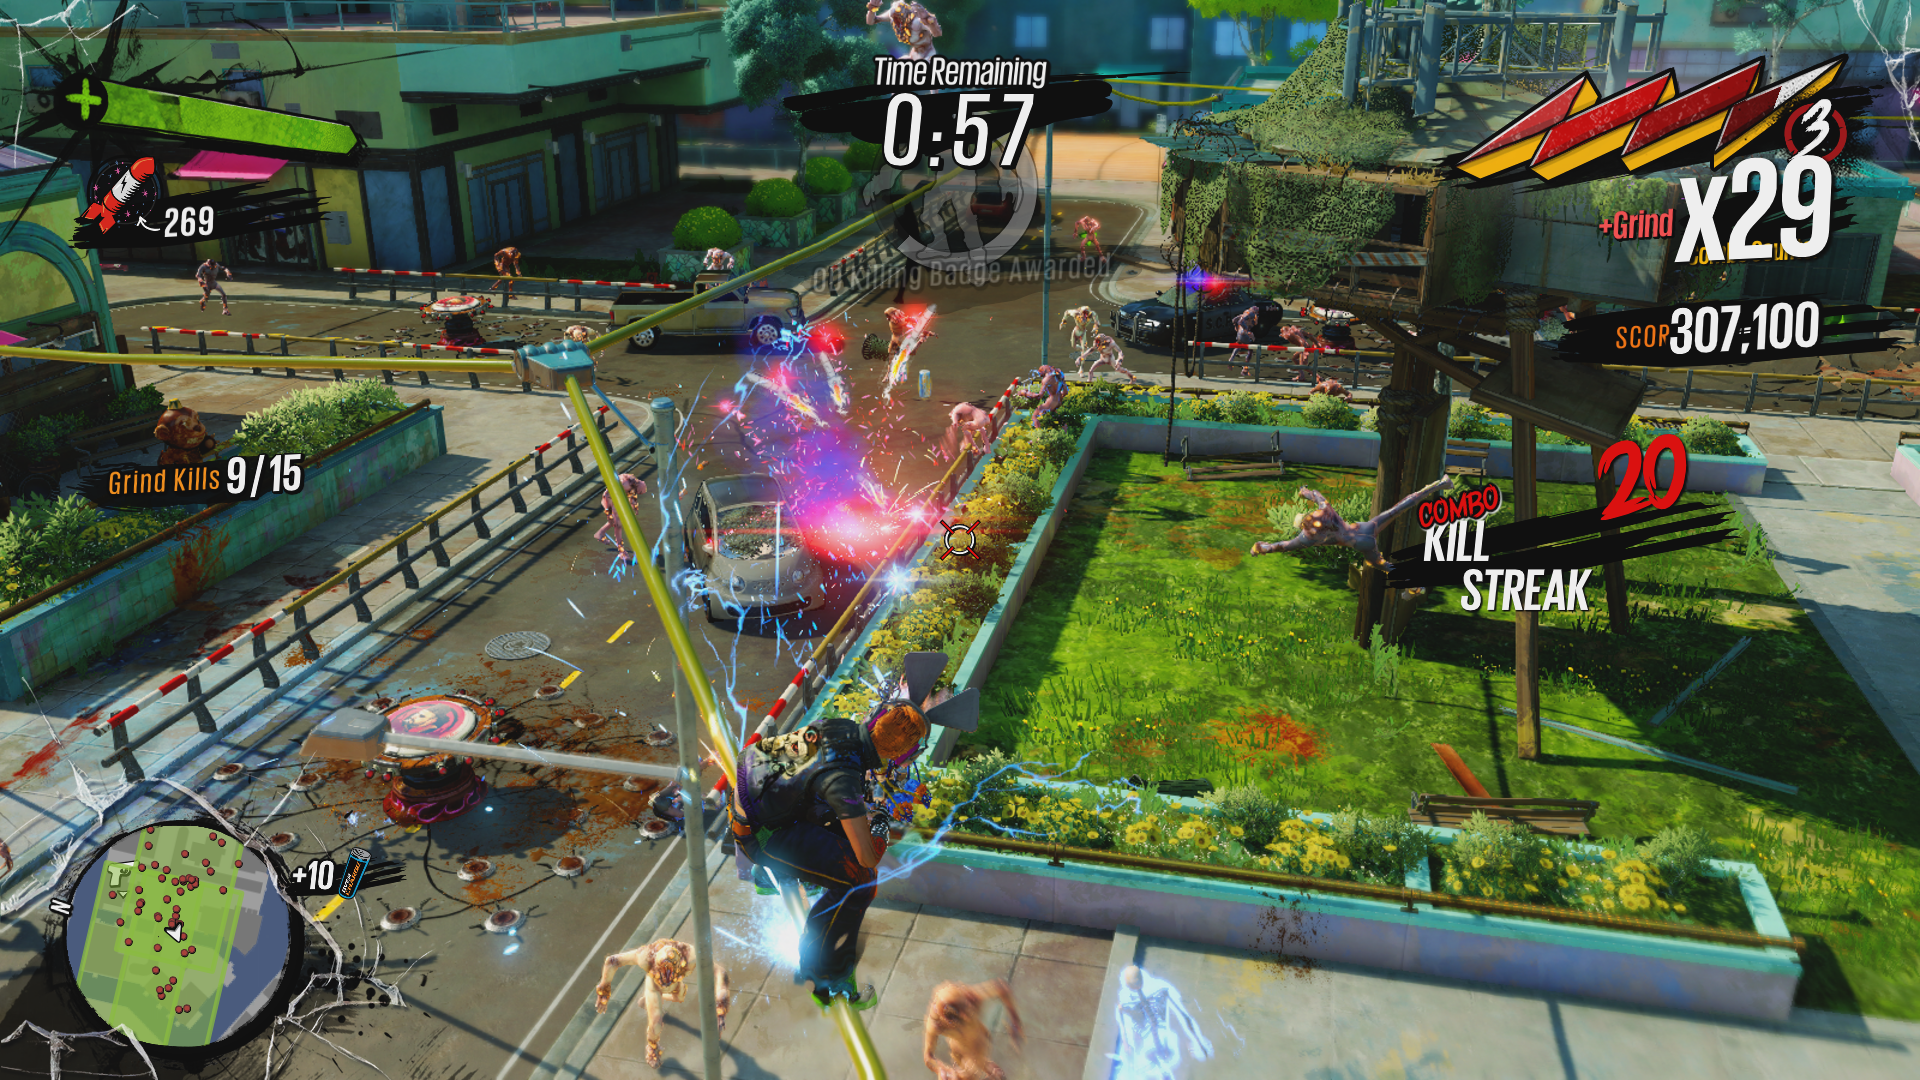 Sunset Overdrive' gameplay review